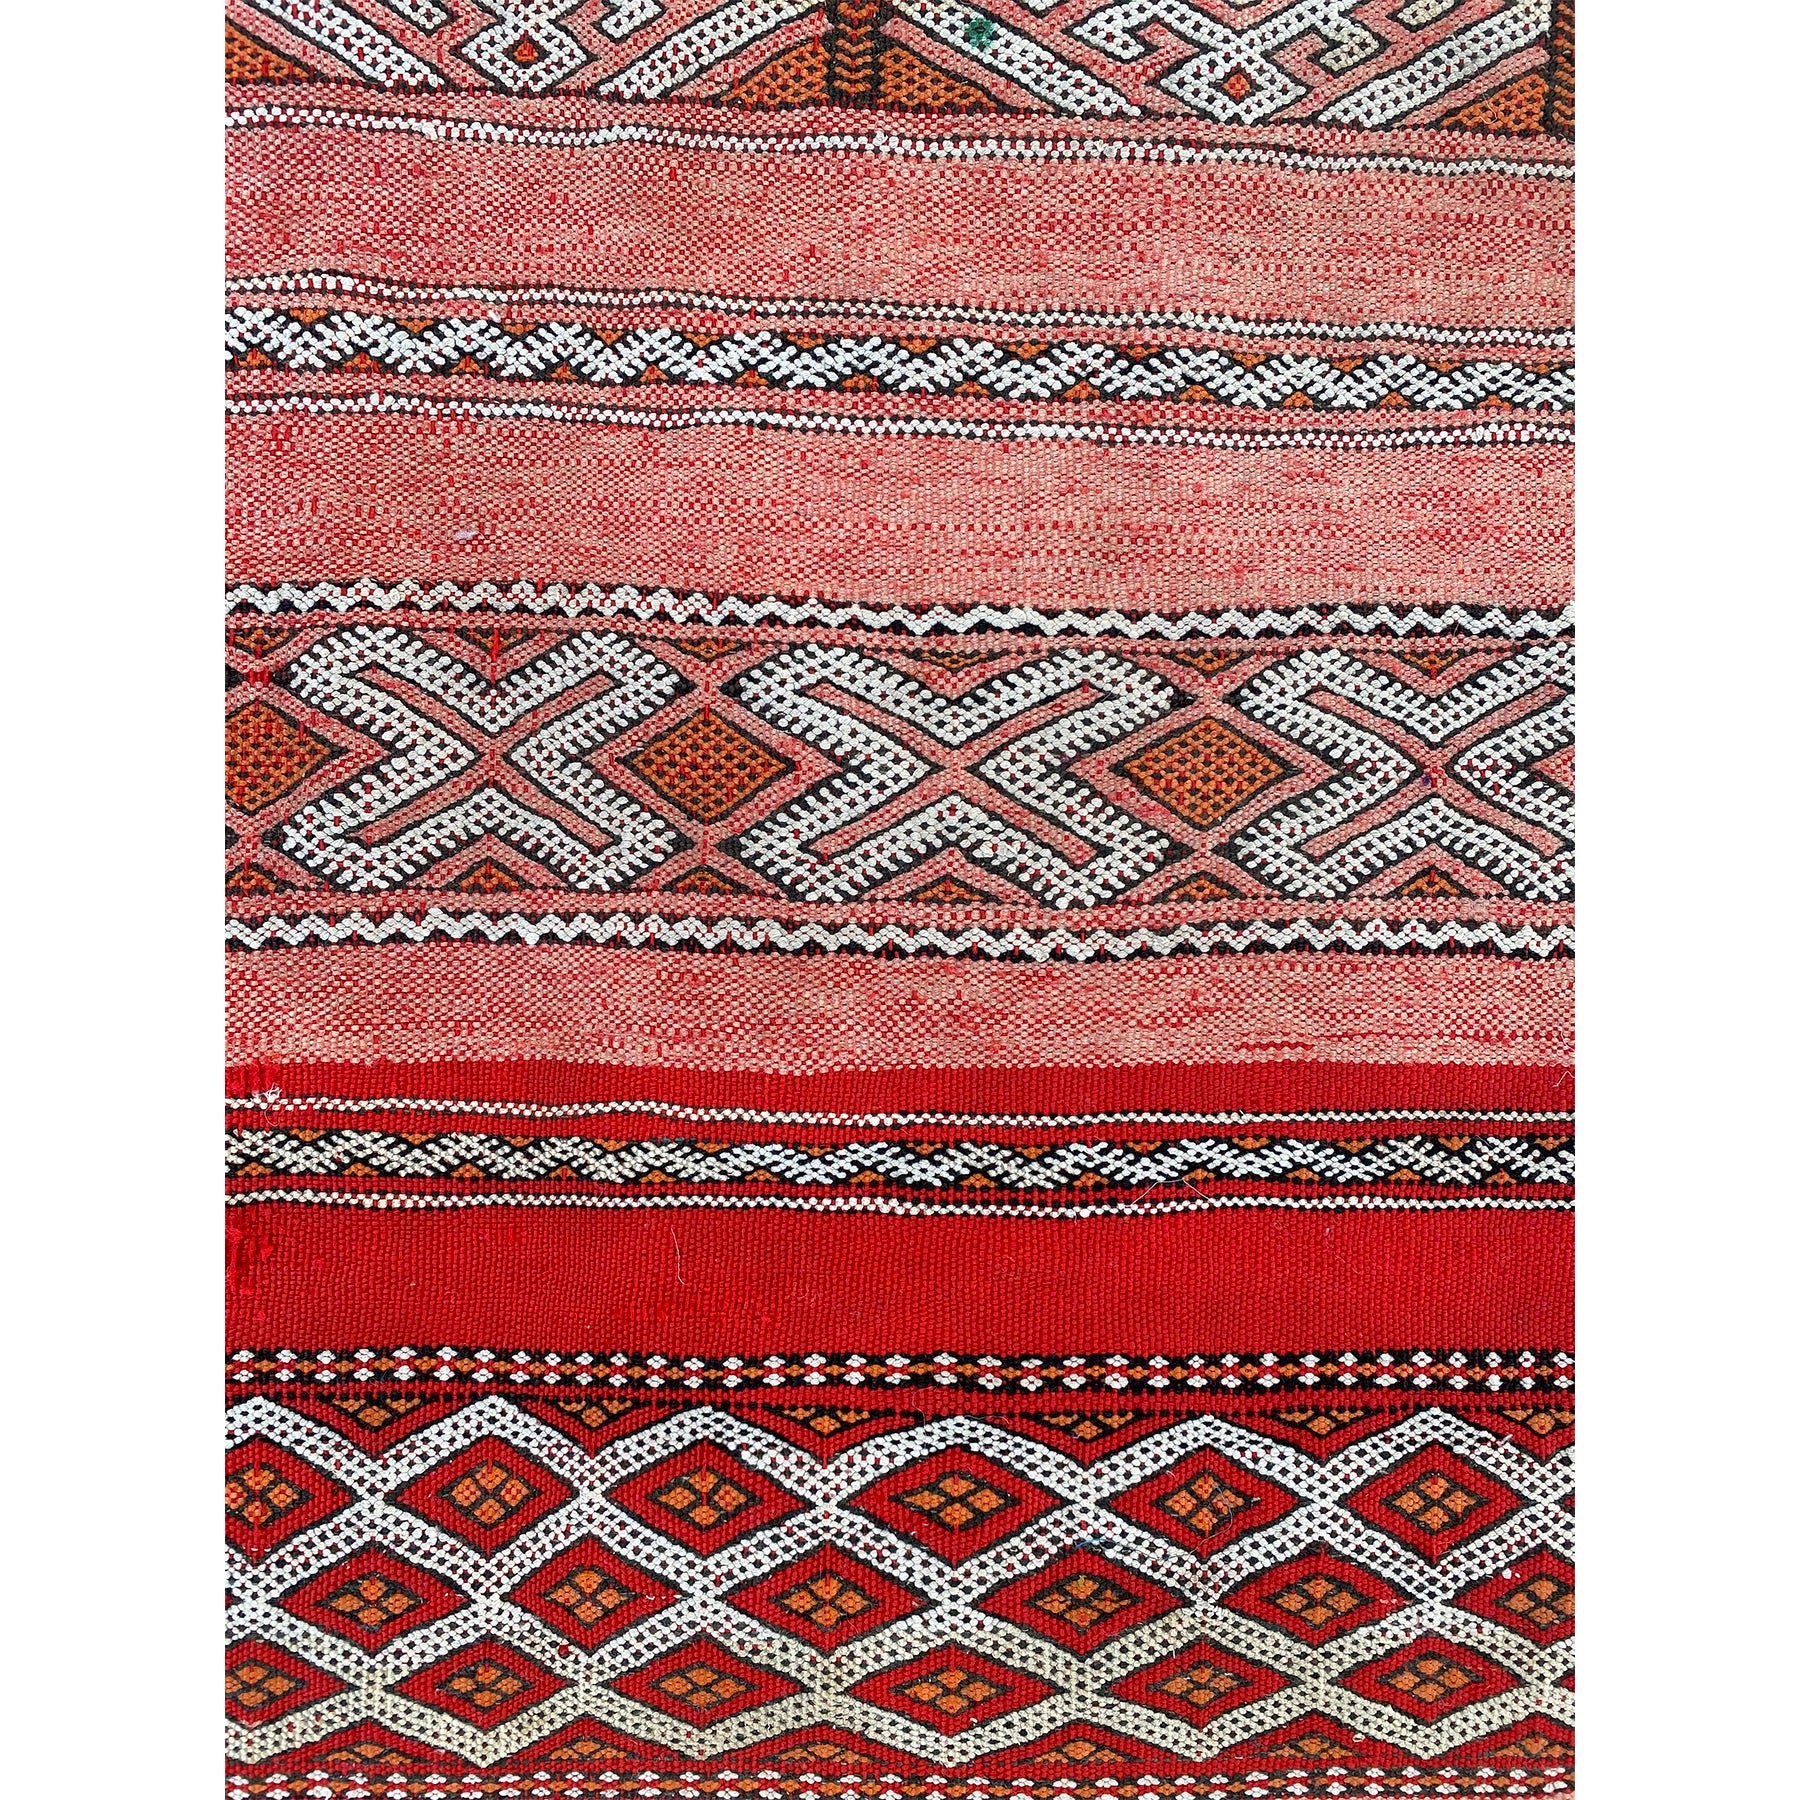 Faded red vintage Moroccan kilim rug with tribal pattern design - Kantara | Moroccan Rugs